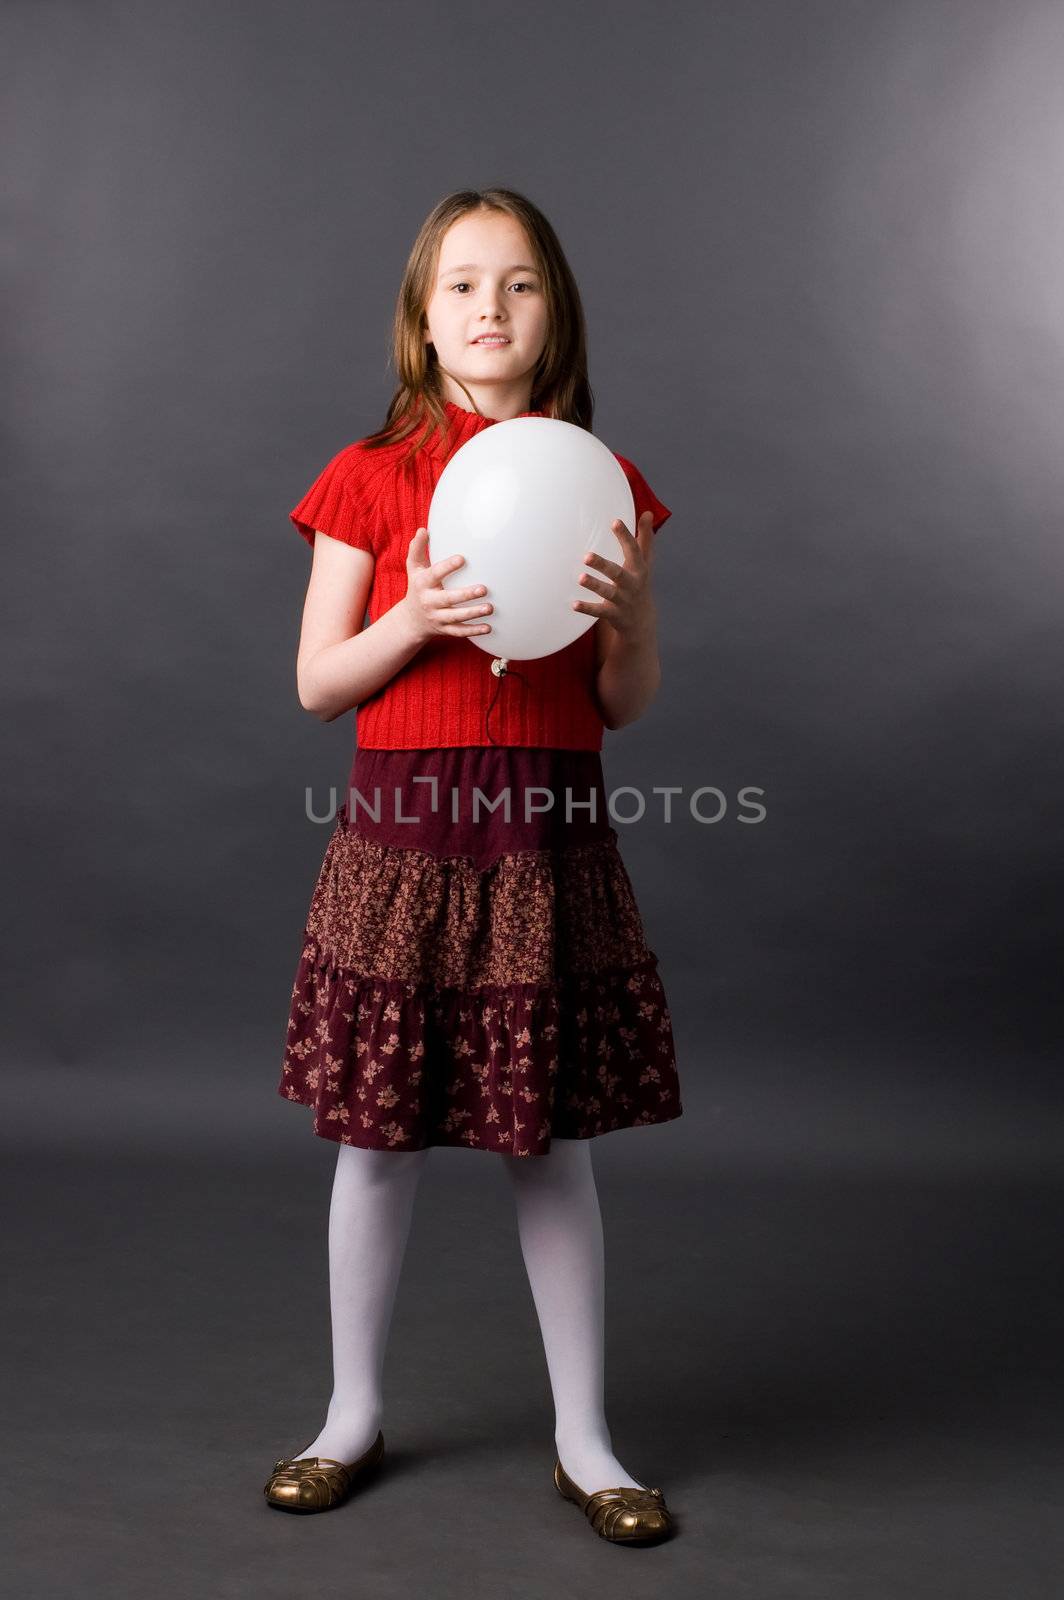 The girl with a ball in studio on a grey background